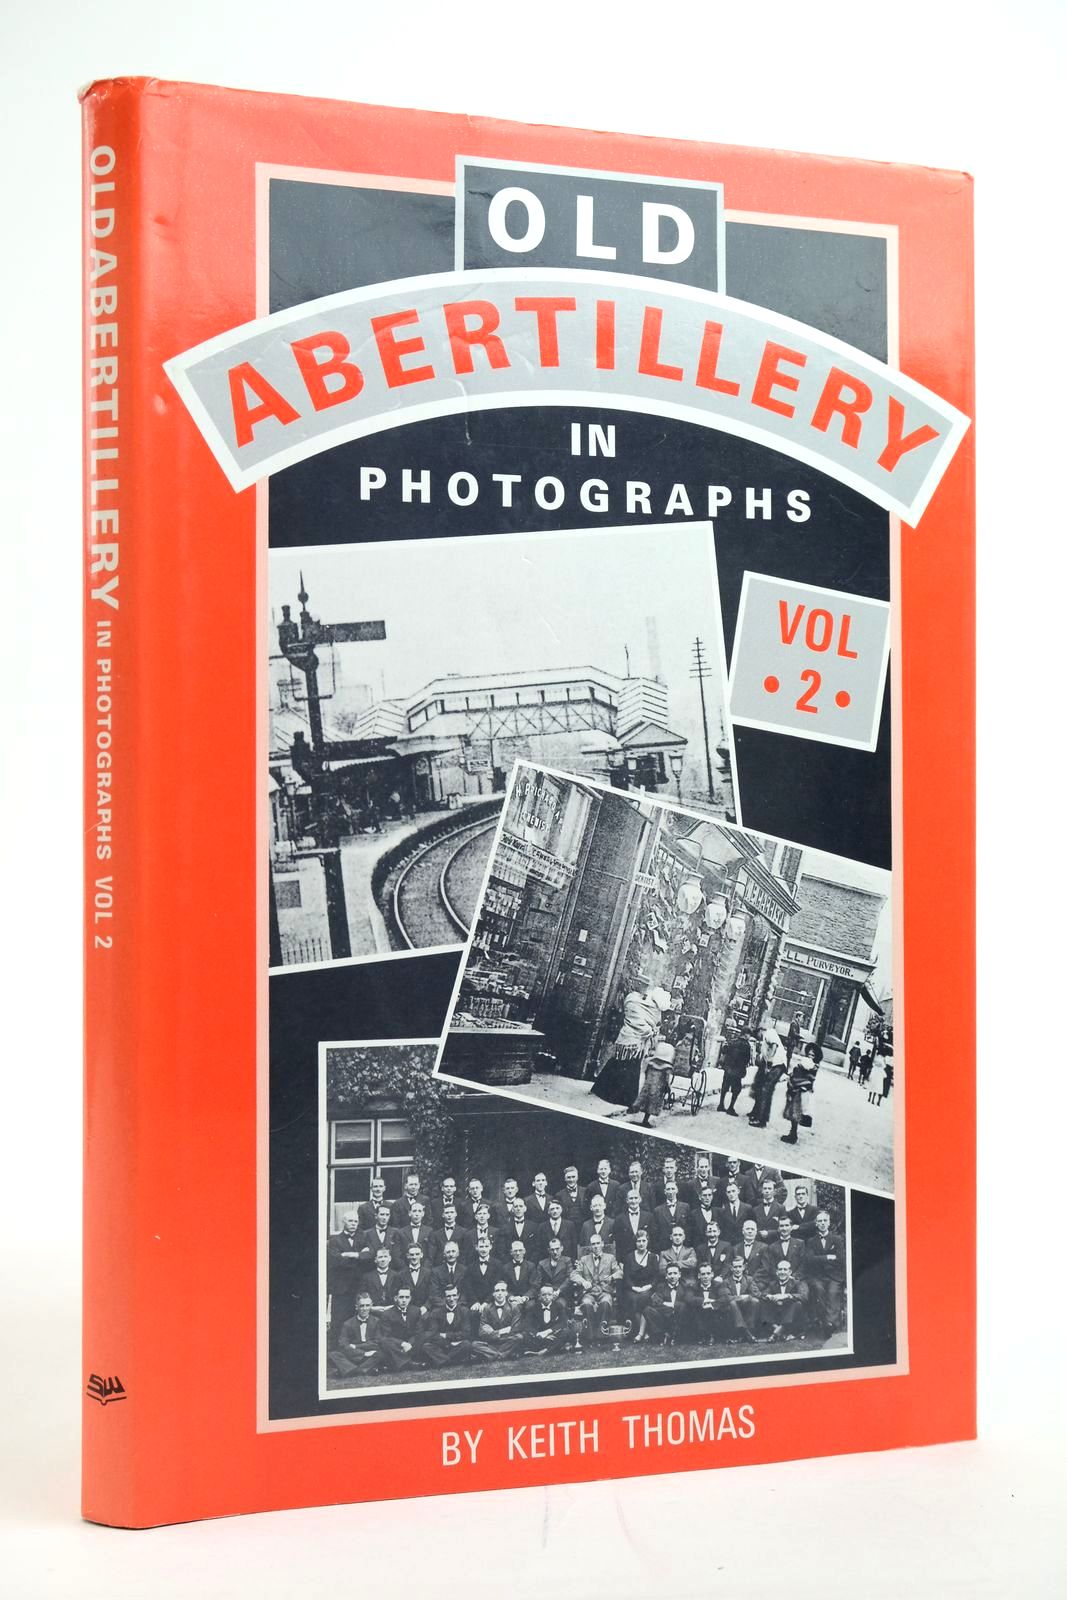 Photo of OLD ABERTILLERY IN PHOTOGRAPHS VOL 2 written by Thomas, Keith published by Stewart Williams (STOCK CODE: 2135282)  for sale by Stella & Rose's Books